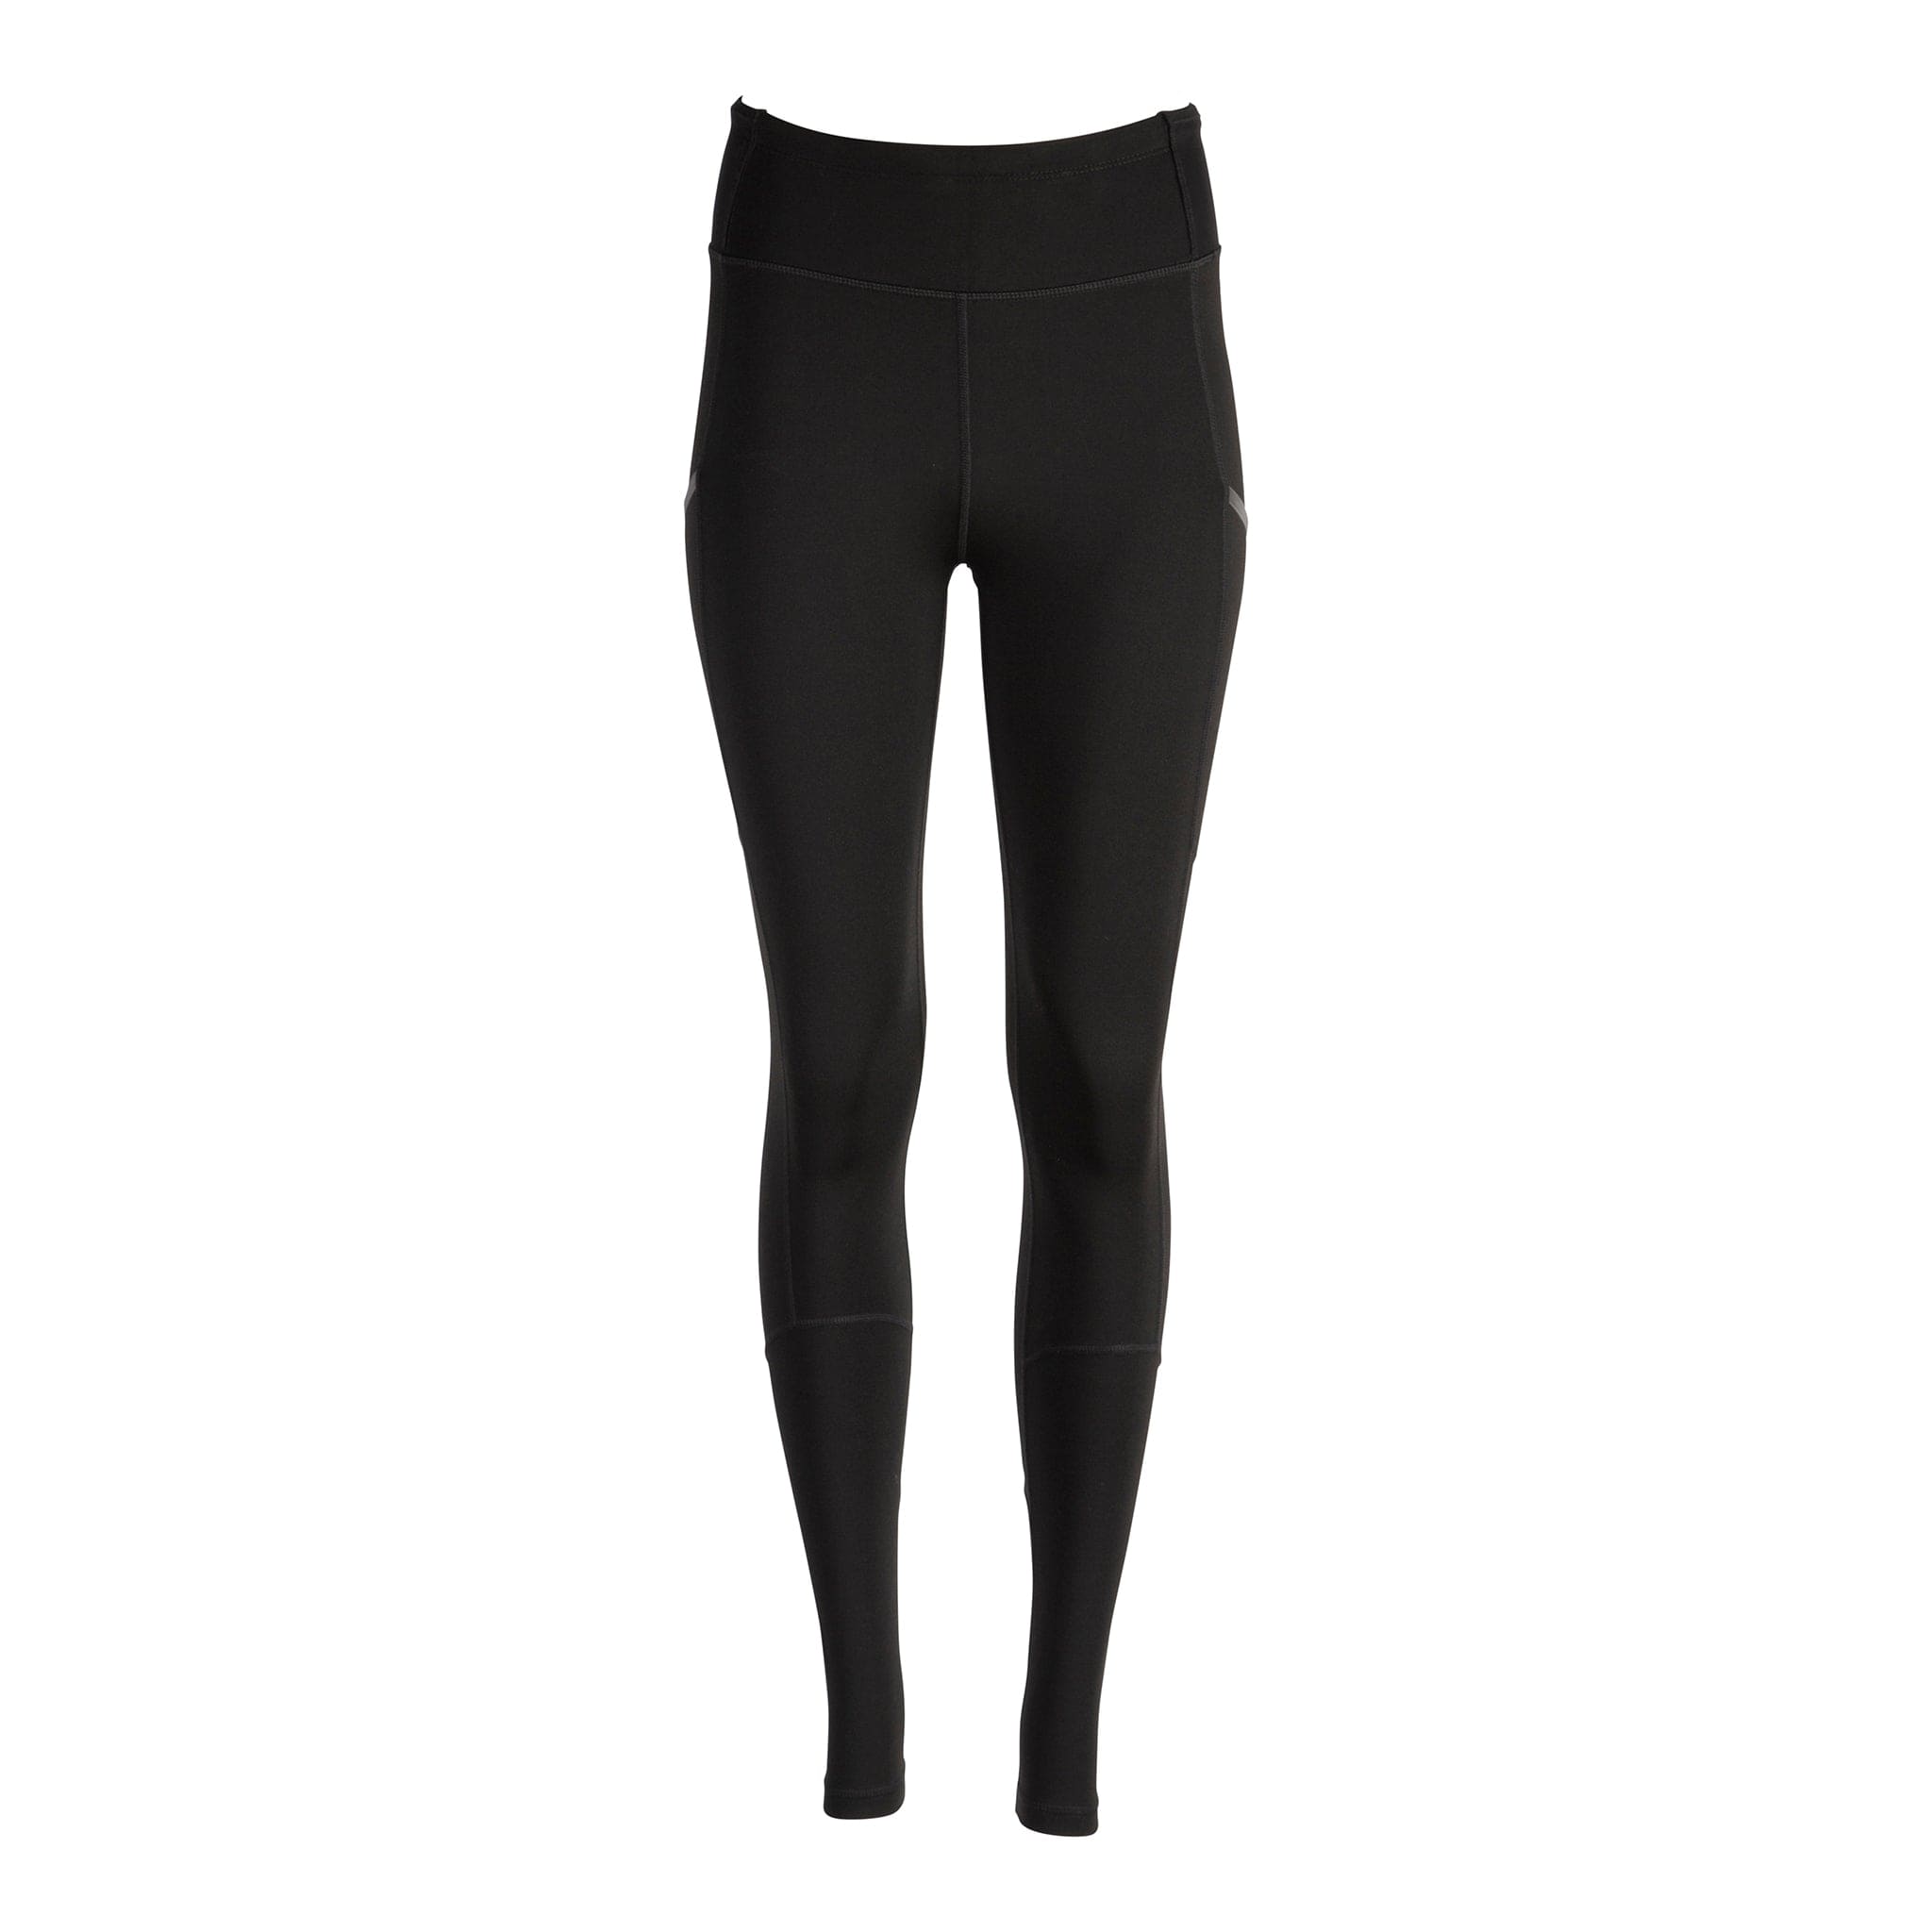 Pure Compression Wool Skiing Tights – Thermal Lightweight